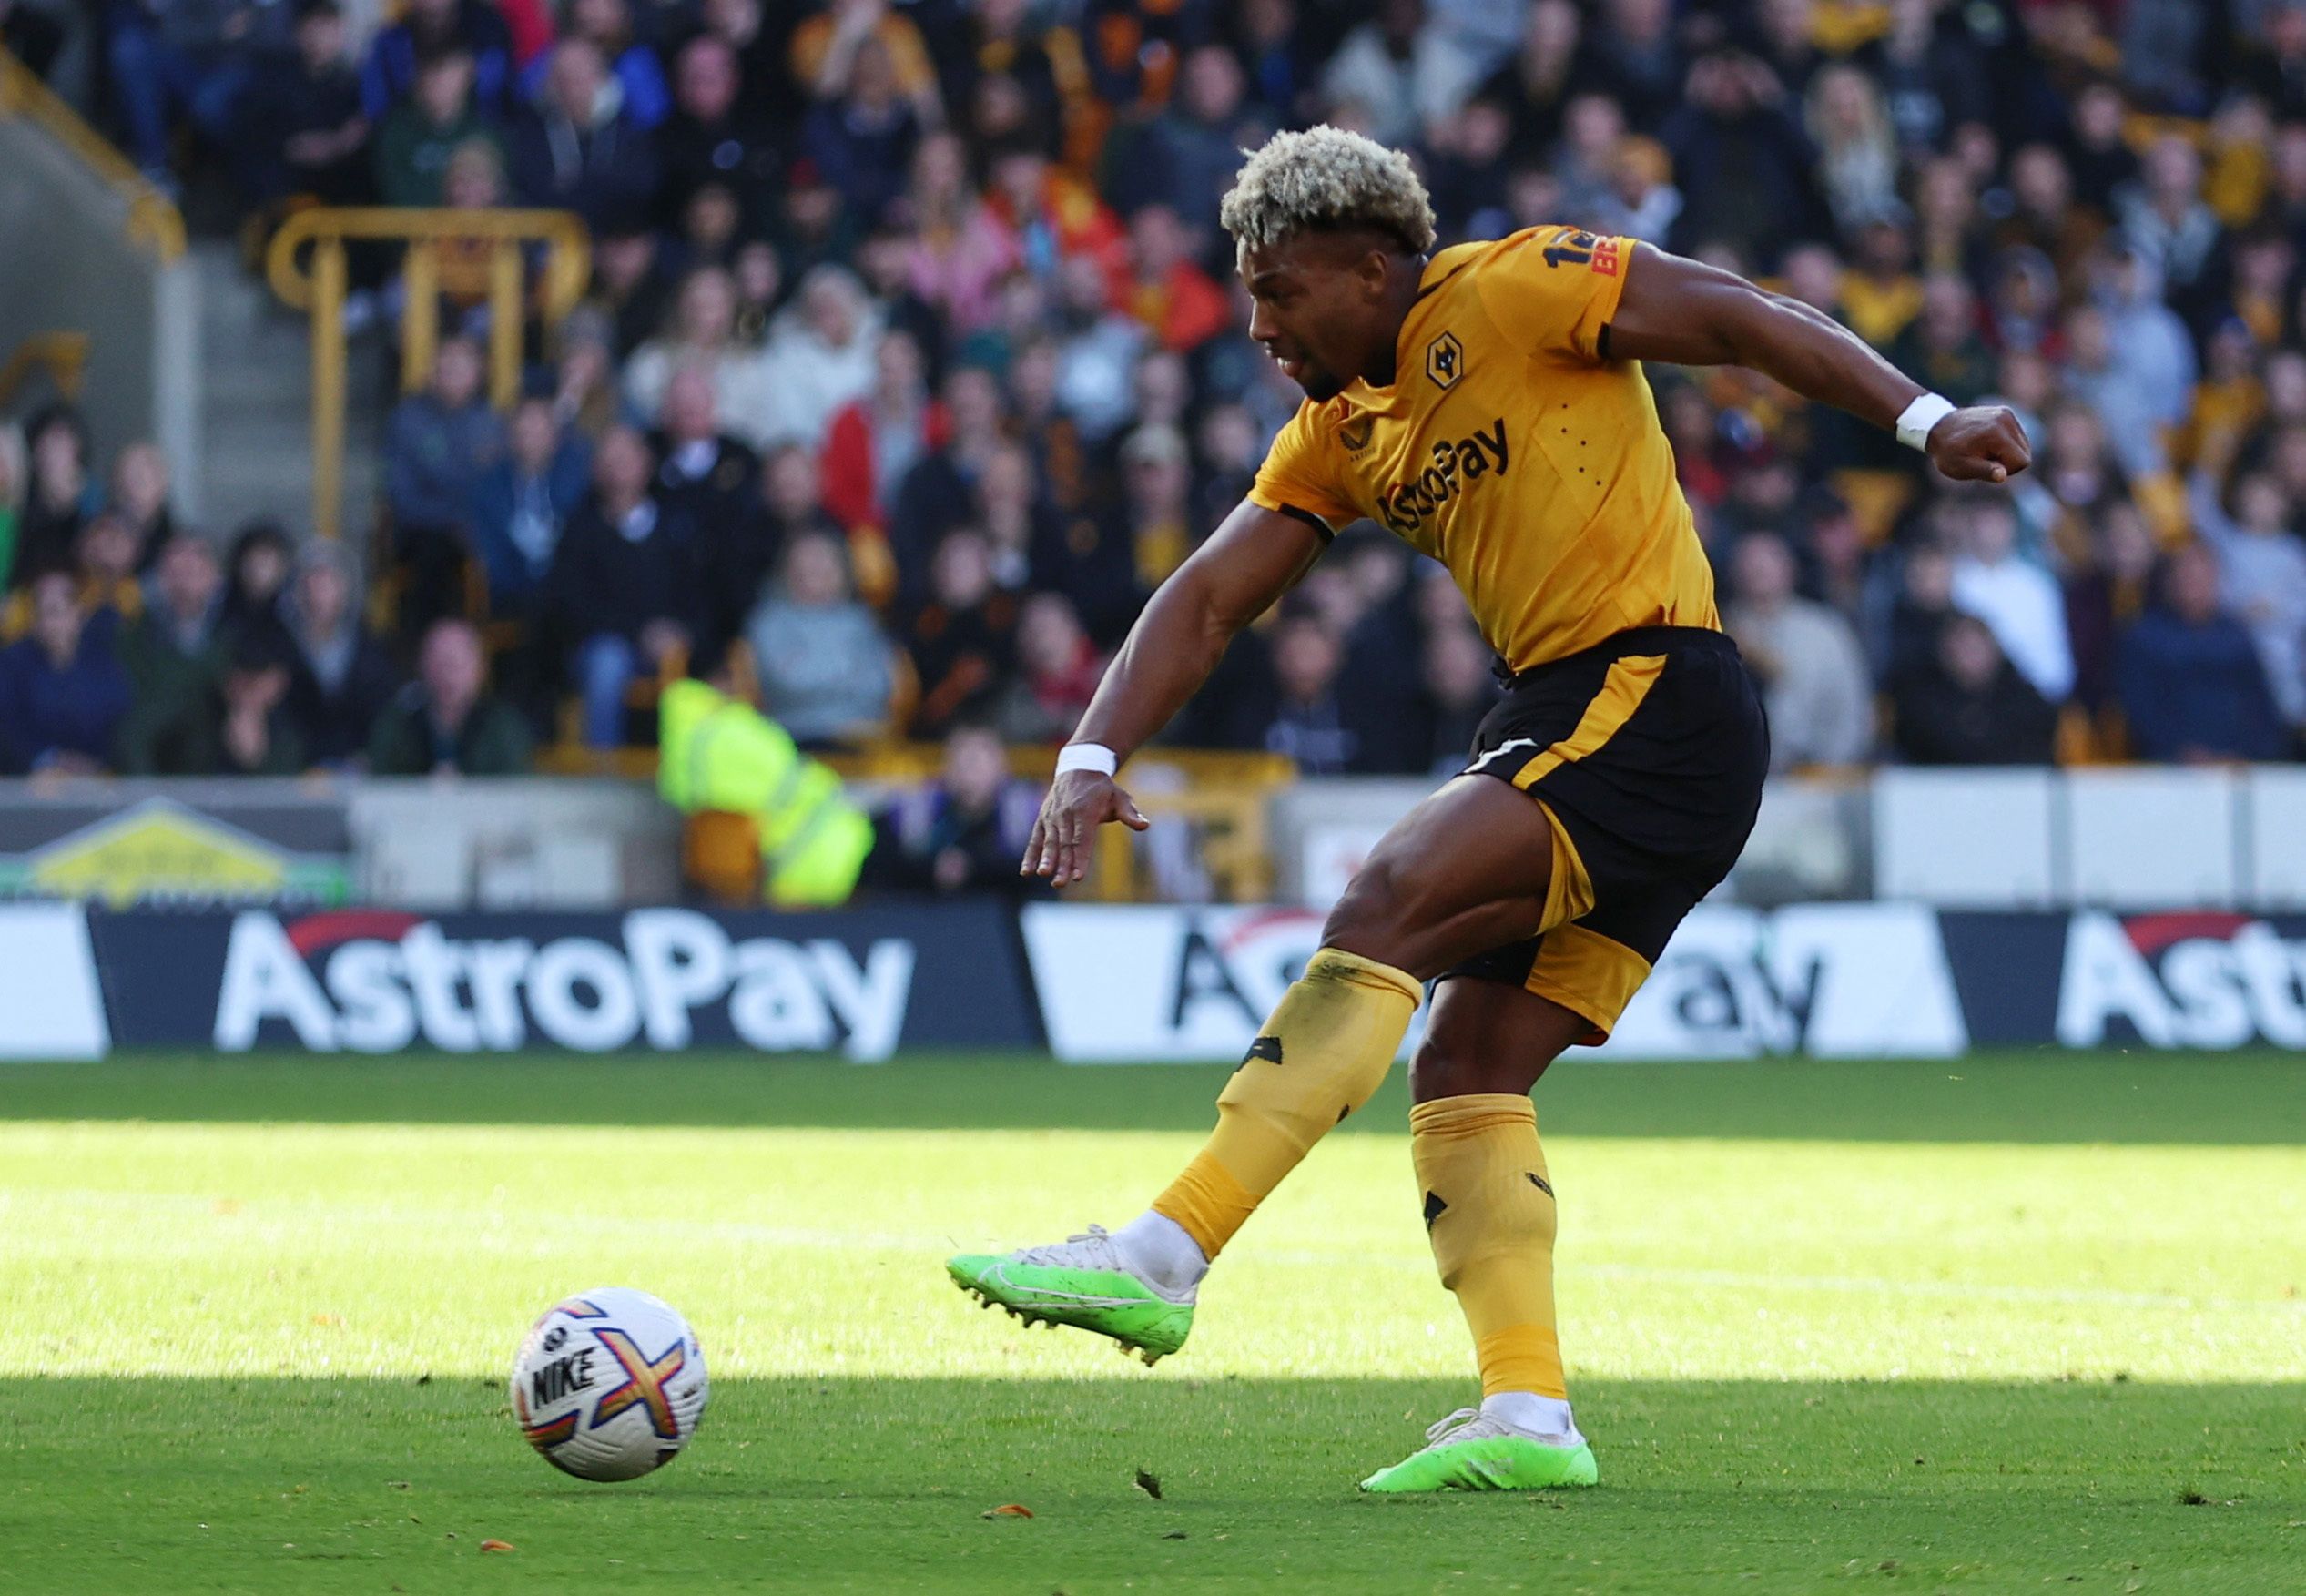 Soccer Football - Premier League - Wolverhampton Wanderers v Nottingham Forest - Molineux Stadium, Wolverhampton, Britain - October 15, 2022  Wolverhampton Wanderers' Adama Traore in action Action Images via Reuters/Andrew Boyers EDITORIAL USE ONLY. No use with unauthorized audio, video, data, fixture lists, club/league logos or 'live' services. Online in-match use limited to 75 images, no video emulation. No use in betting, games or single club /league/player publications.  Please contact your 